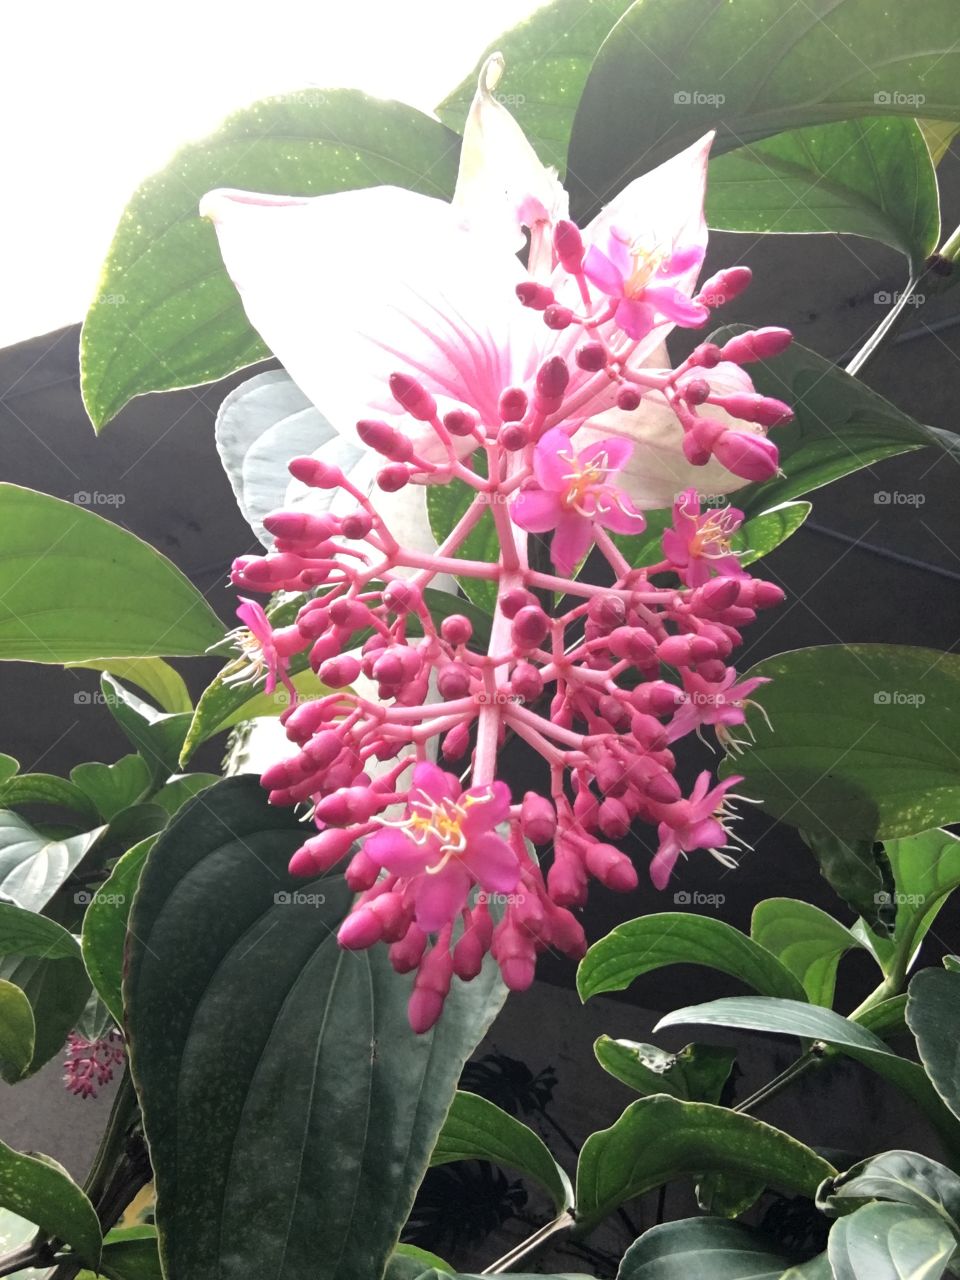 Pink tropical flowers, green leaves, pink blooms with green foliage